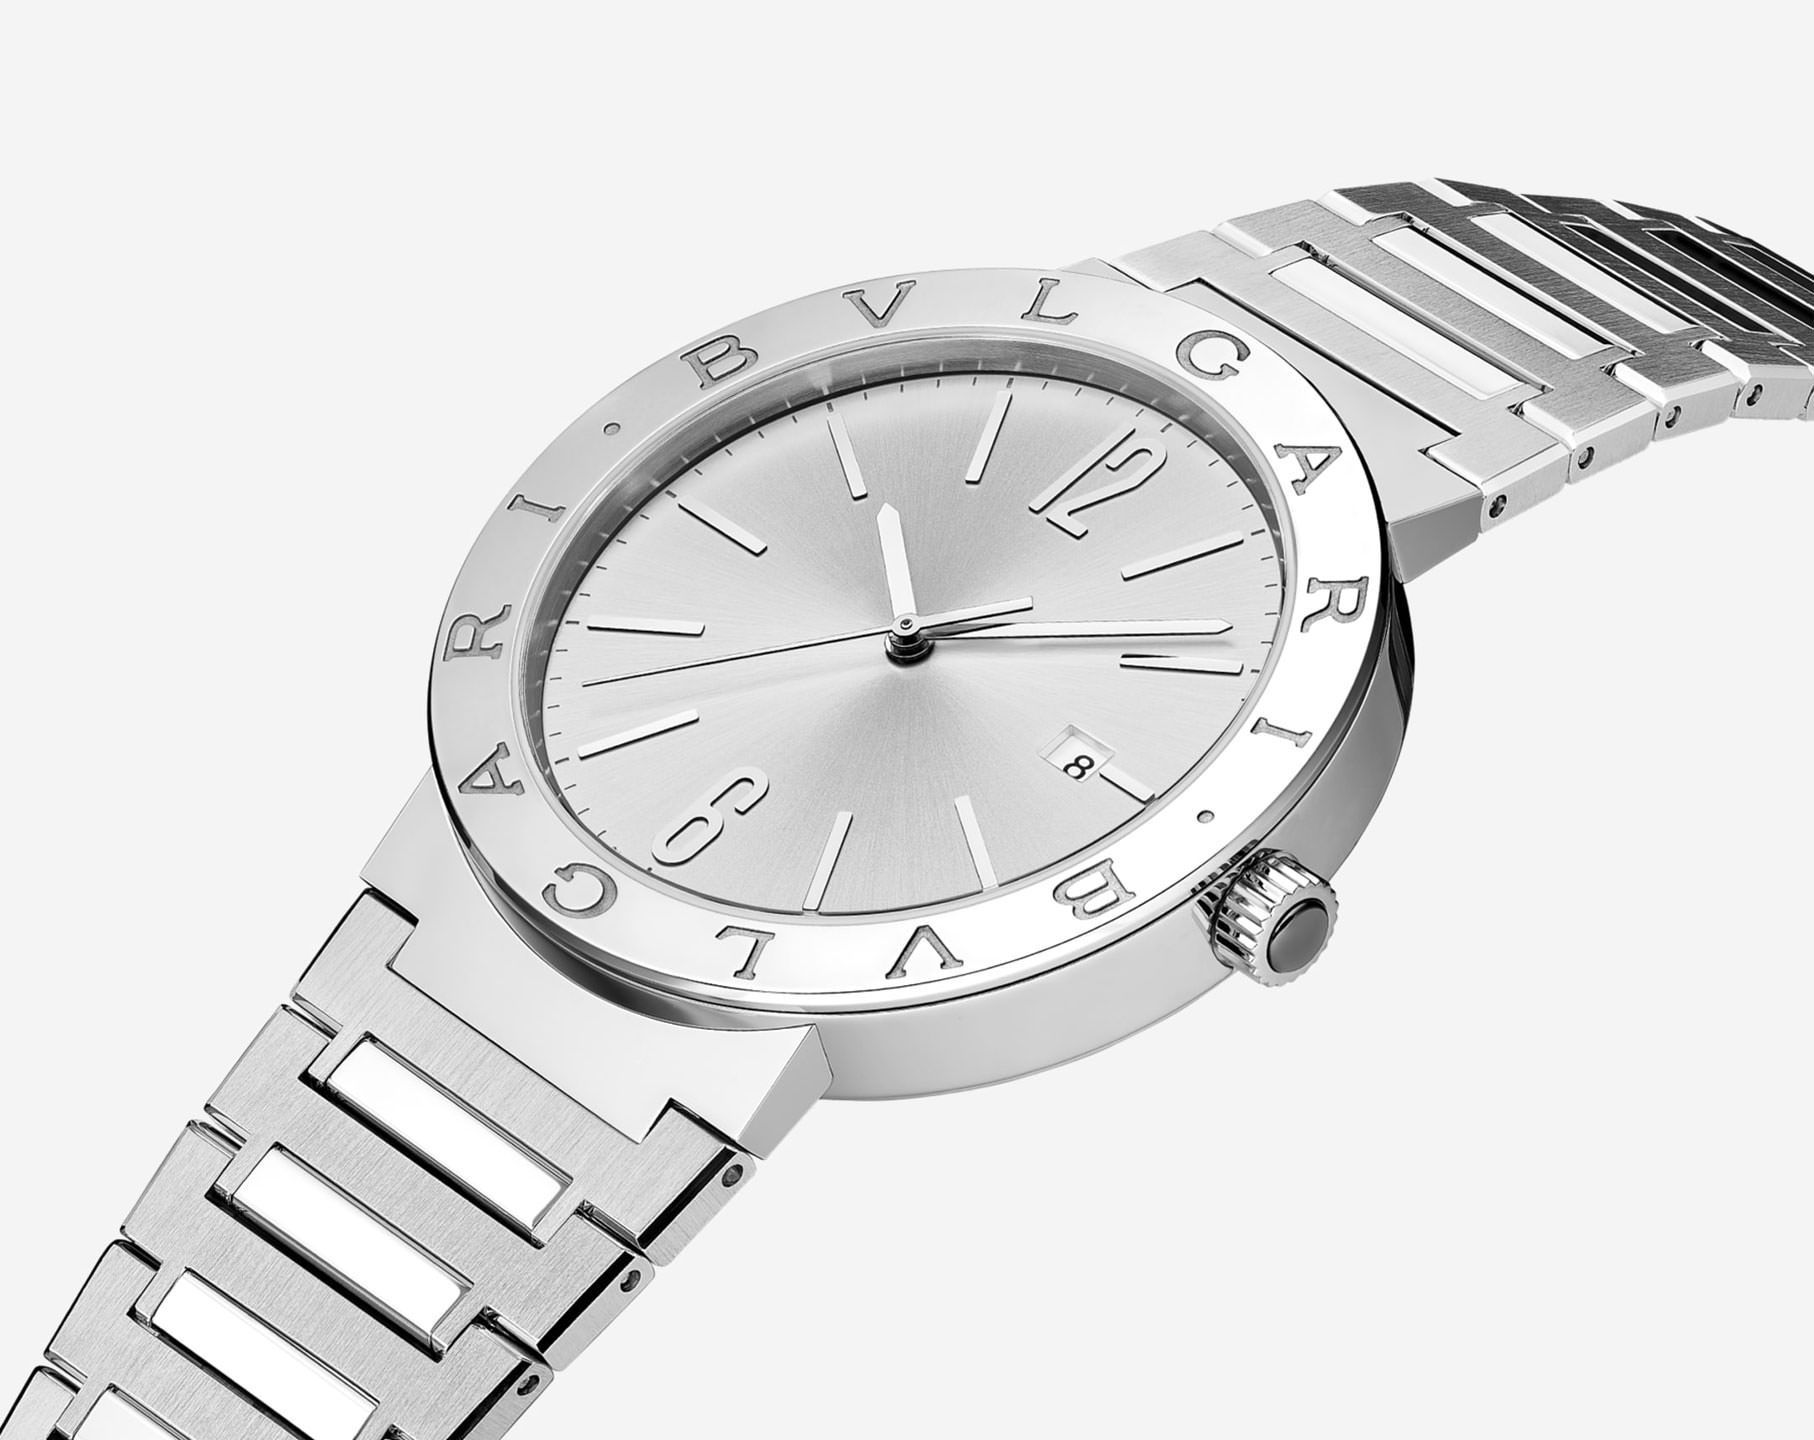 BVLGARI  41 mm Watch in Silver Dial For Men - 2